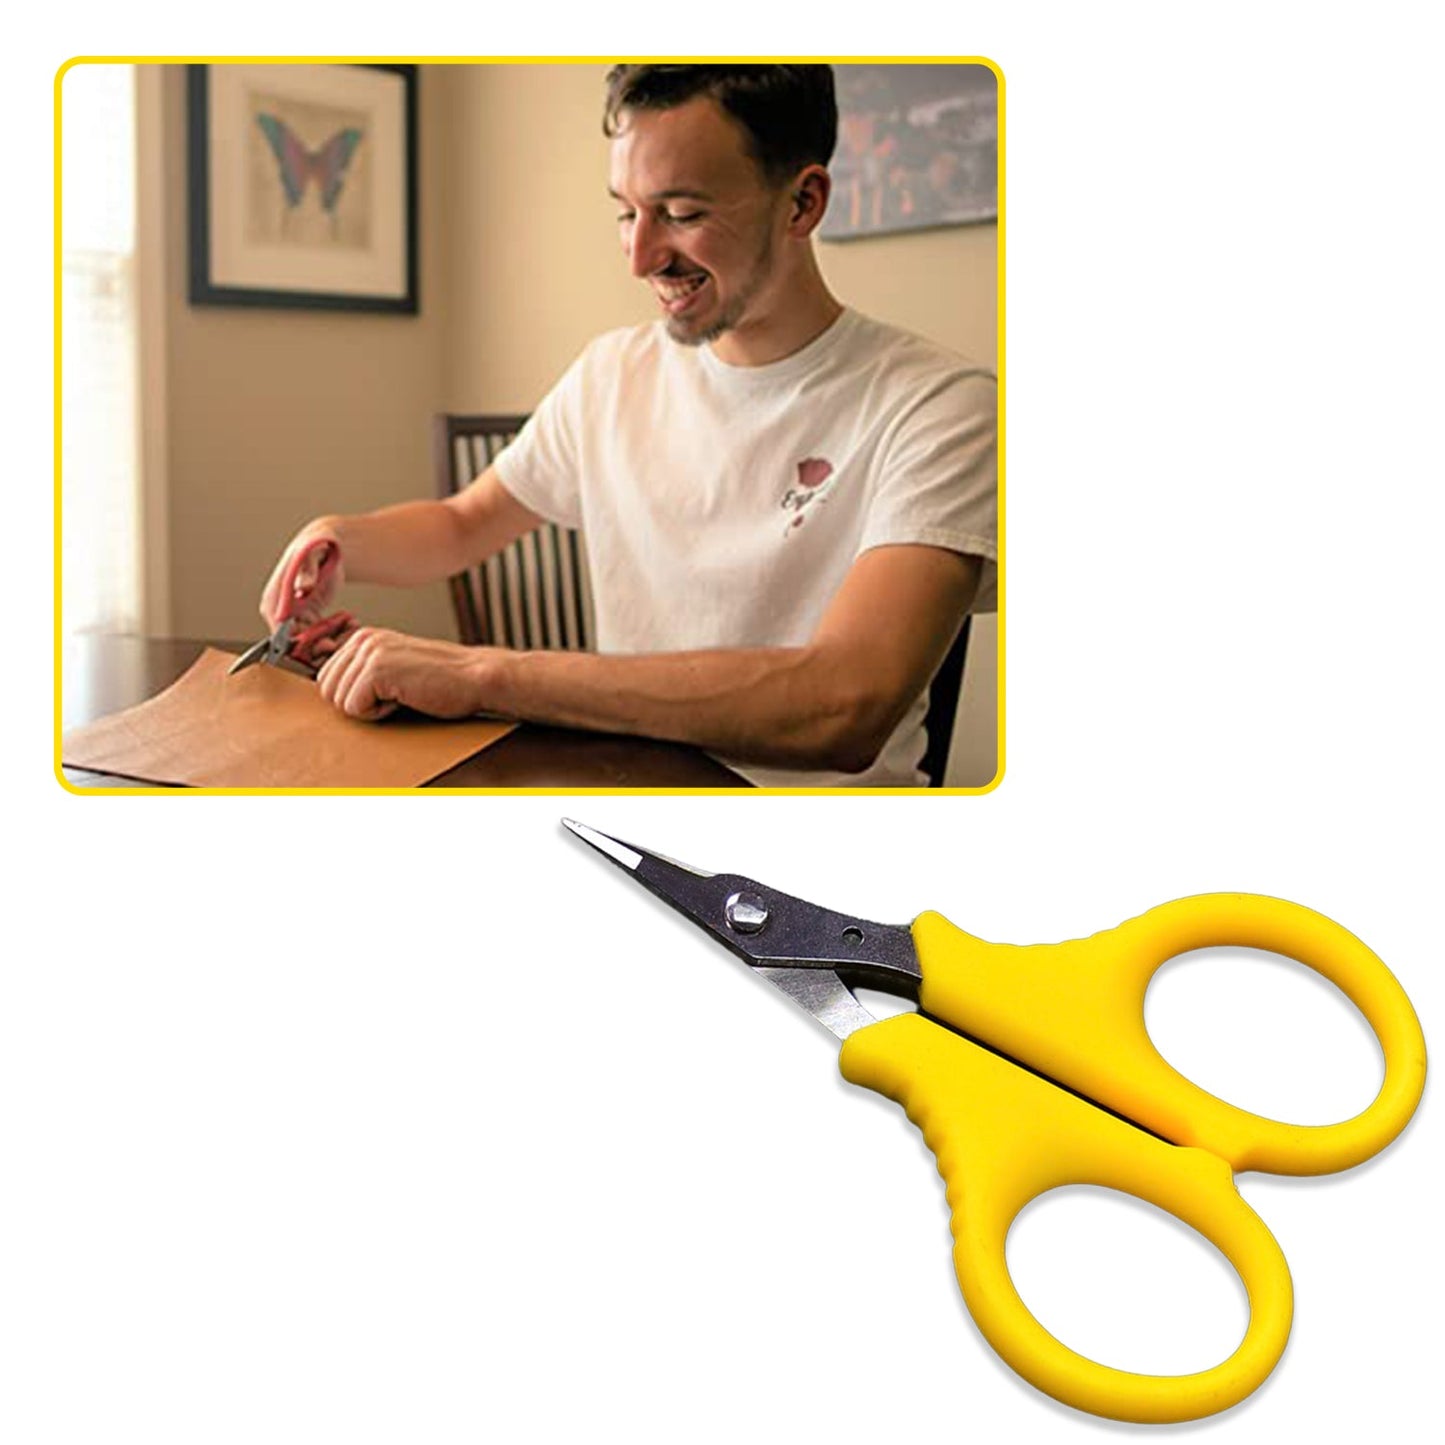 9112 Multipurpose Scissors Comfort Grip Handles Used in Home and Office. DukanDaily